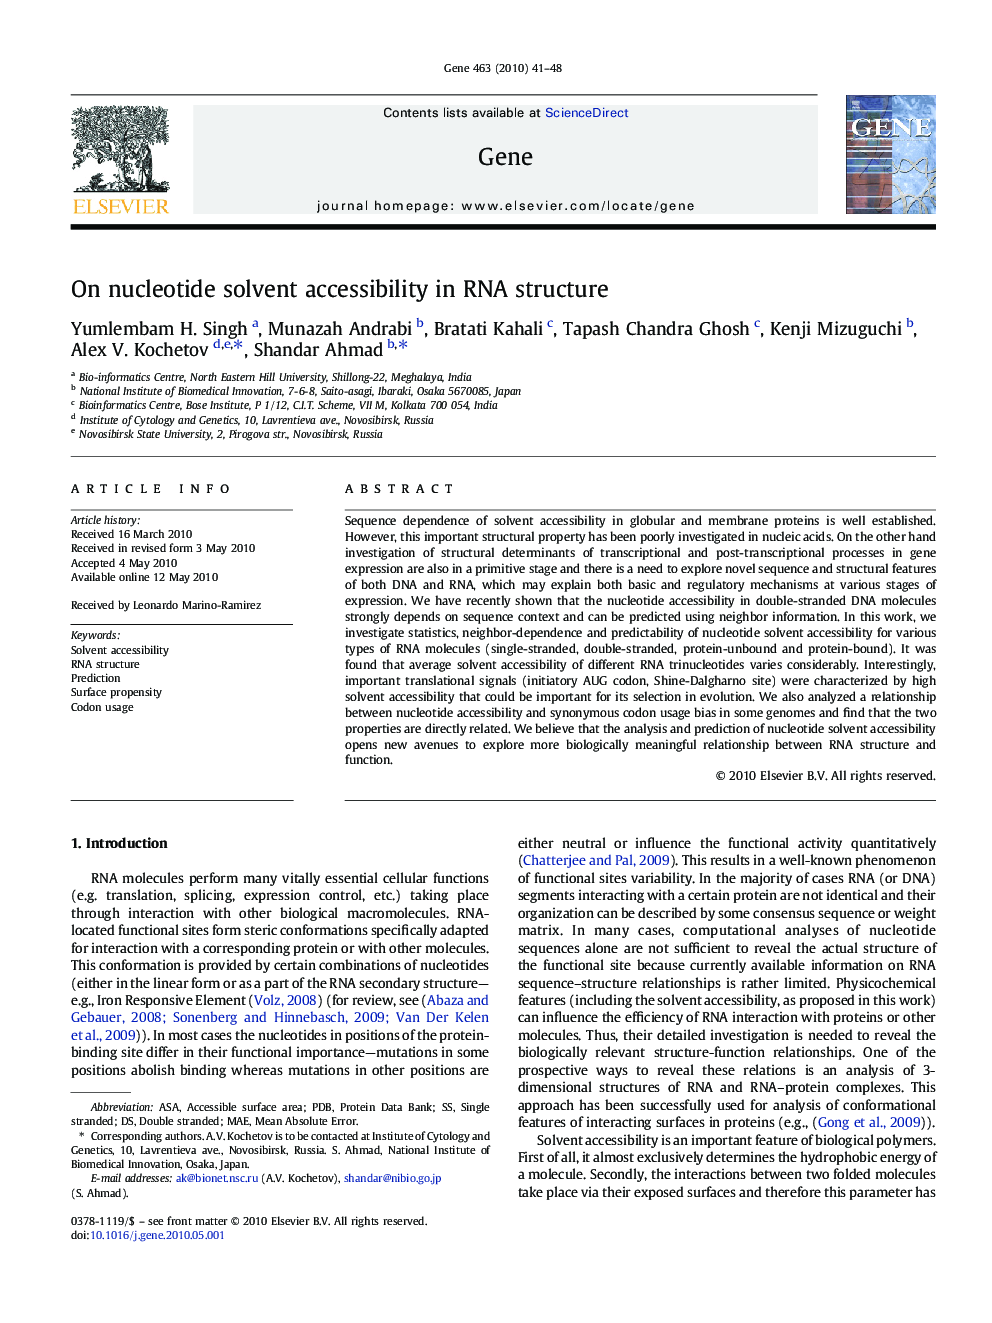 On nucleotide solvent accessibility in RNA structure